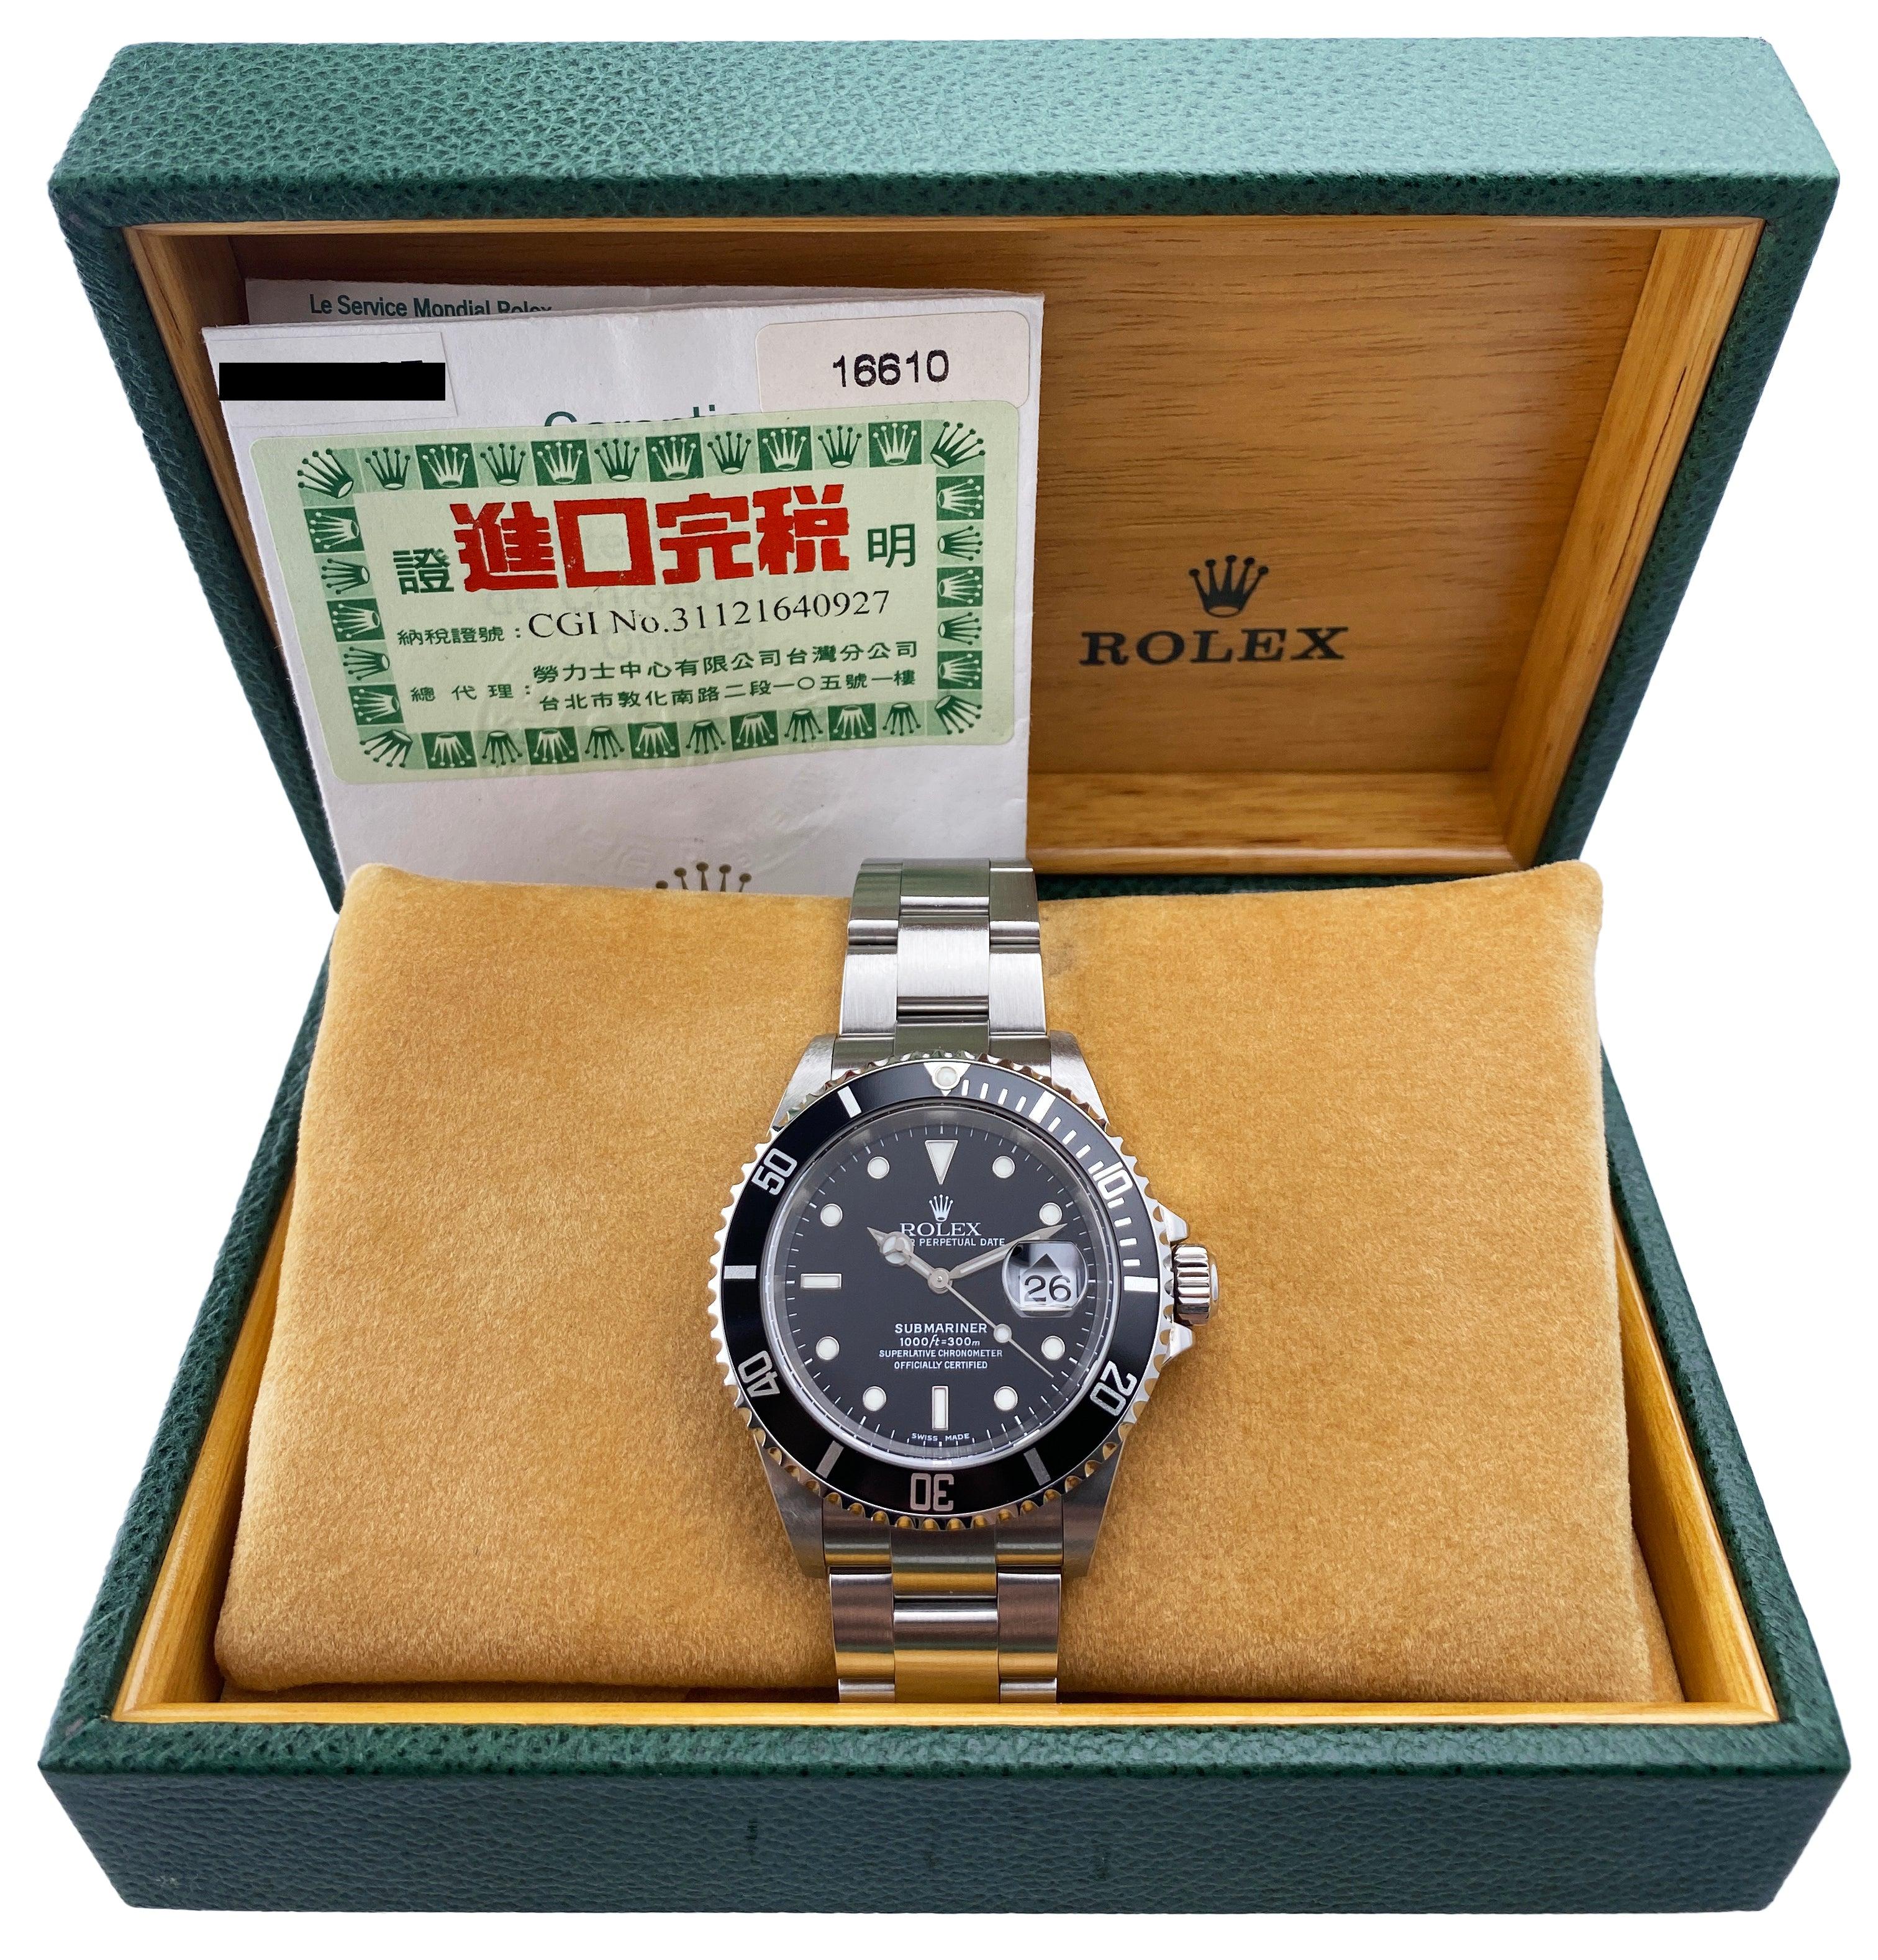 Rolex Oyster Perpetual Date Submariner 16610 Mens Watch. 40mm stainless steel case. Unidirectional rotating stainless steel bezel with black insert. Black dial with steel luminous hands and markers. Date display at 3 o'clock position. Stainless